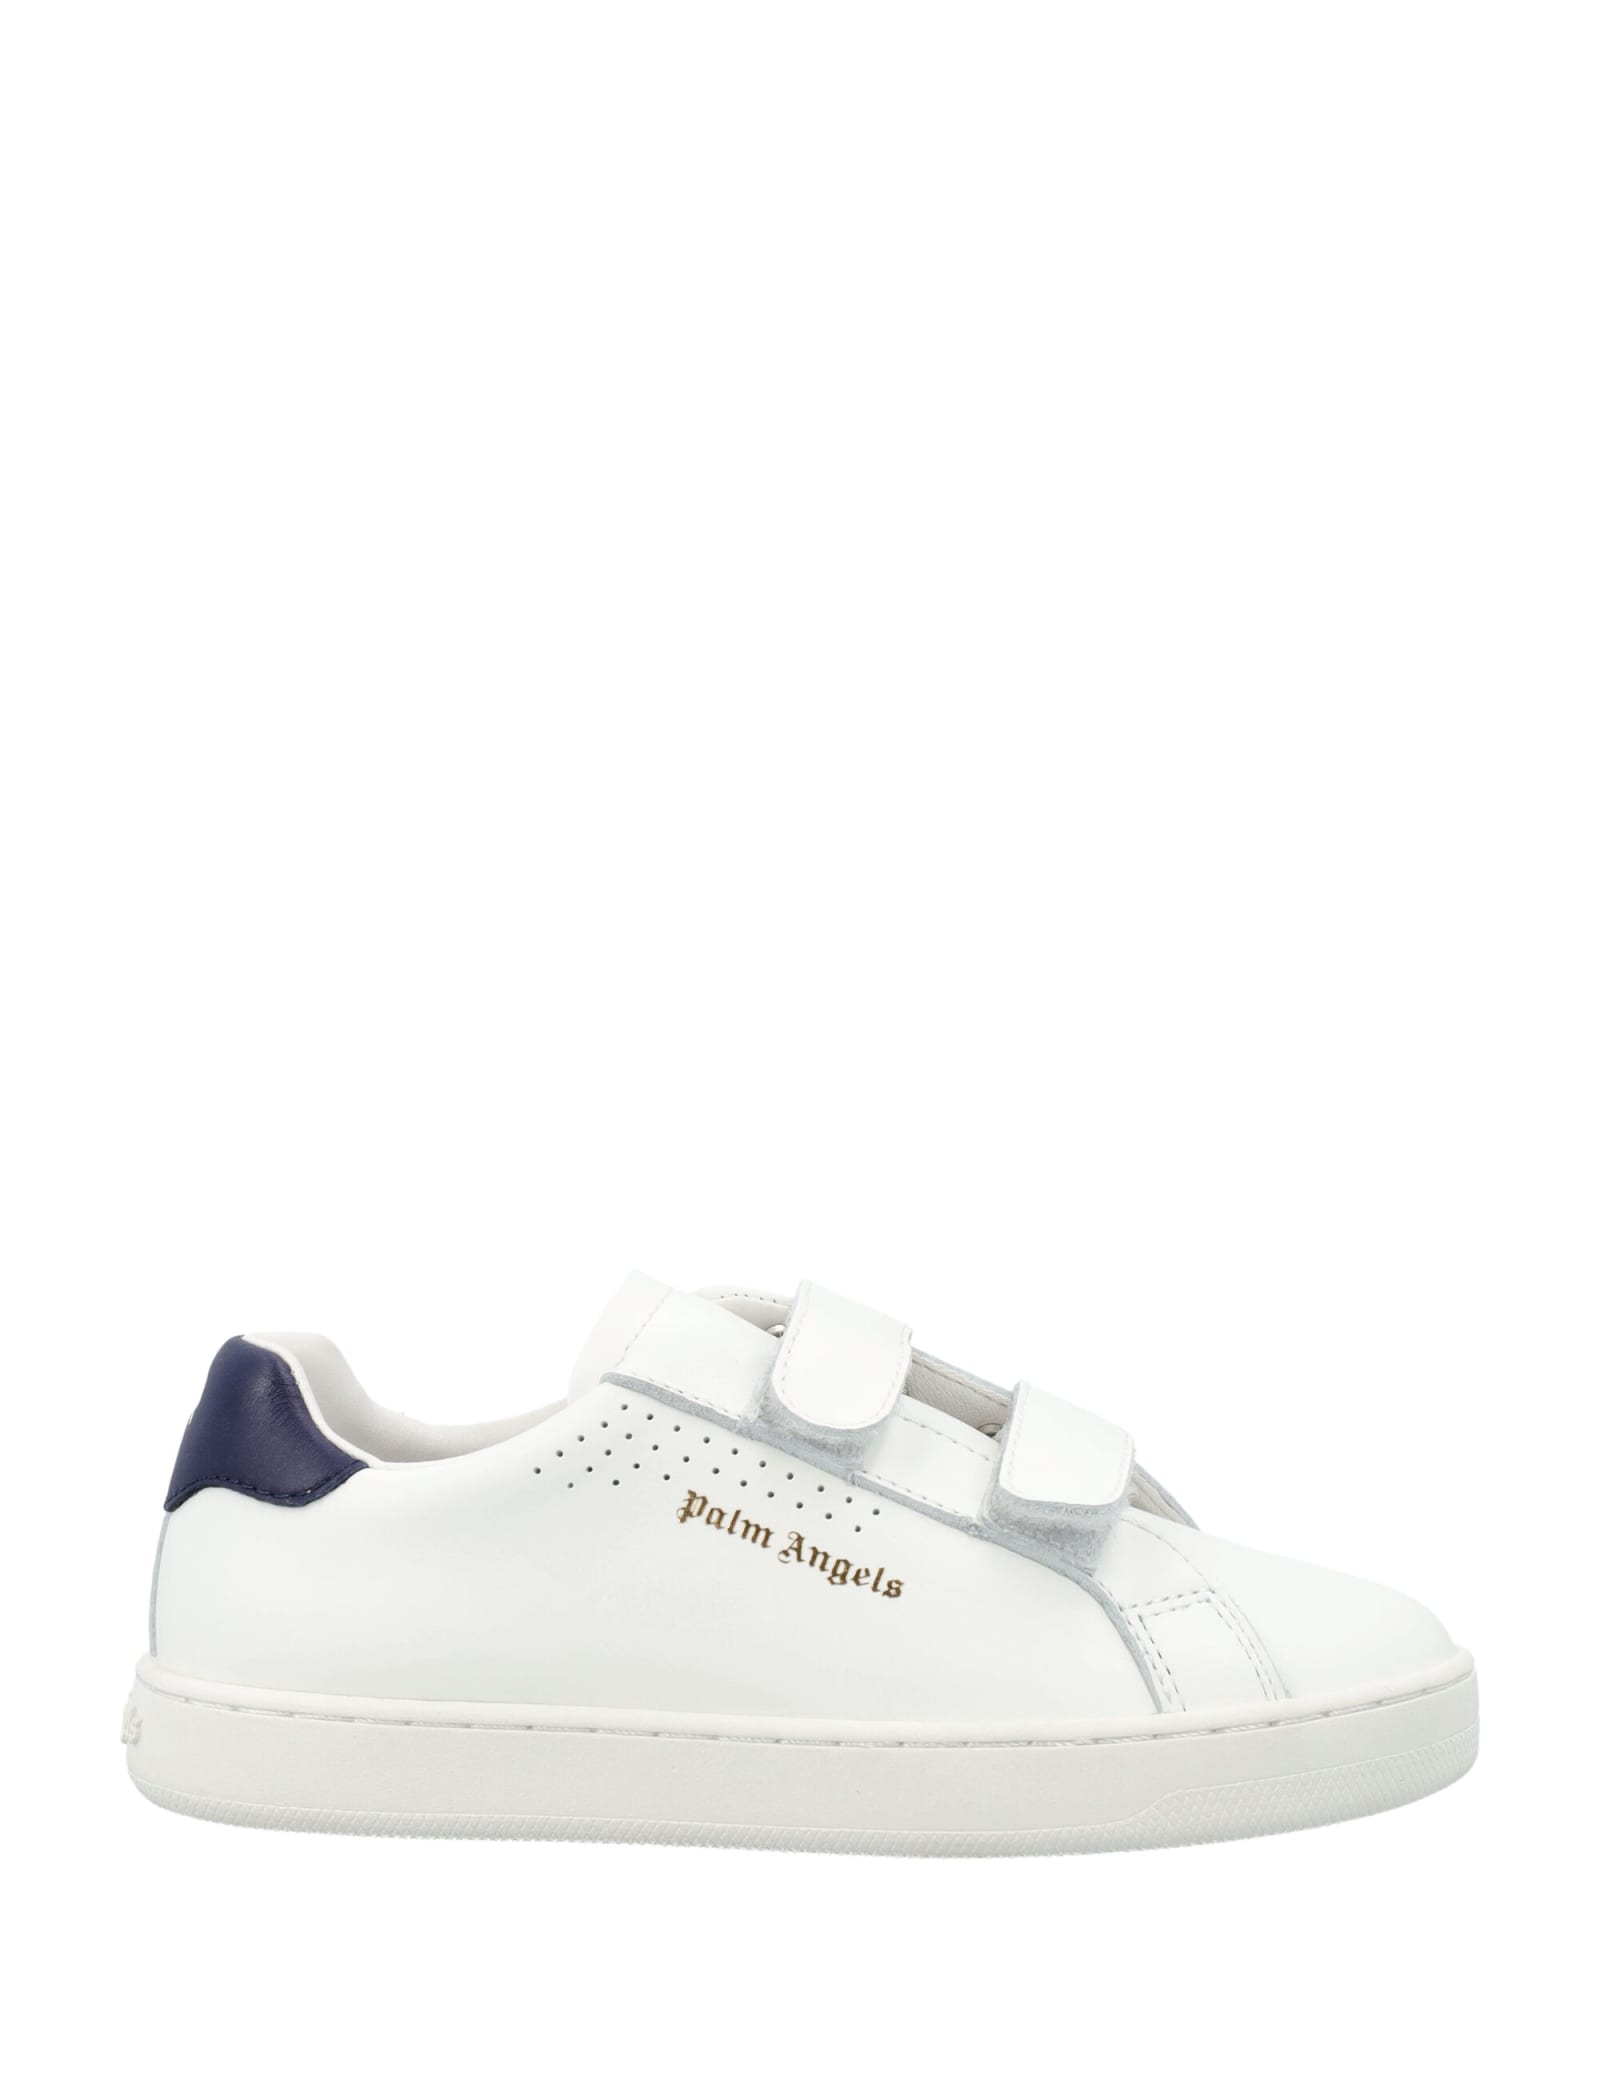 Palm Angels Palm Strap Sneakers